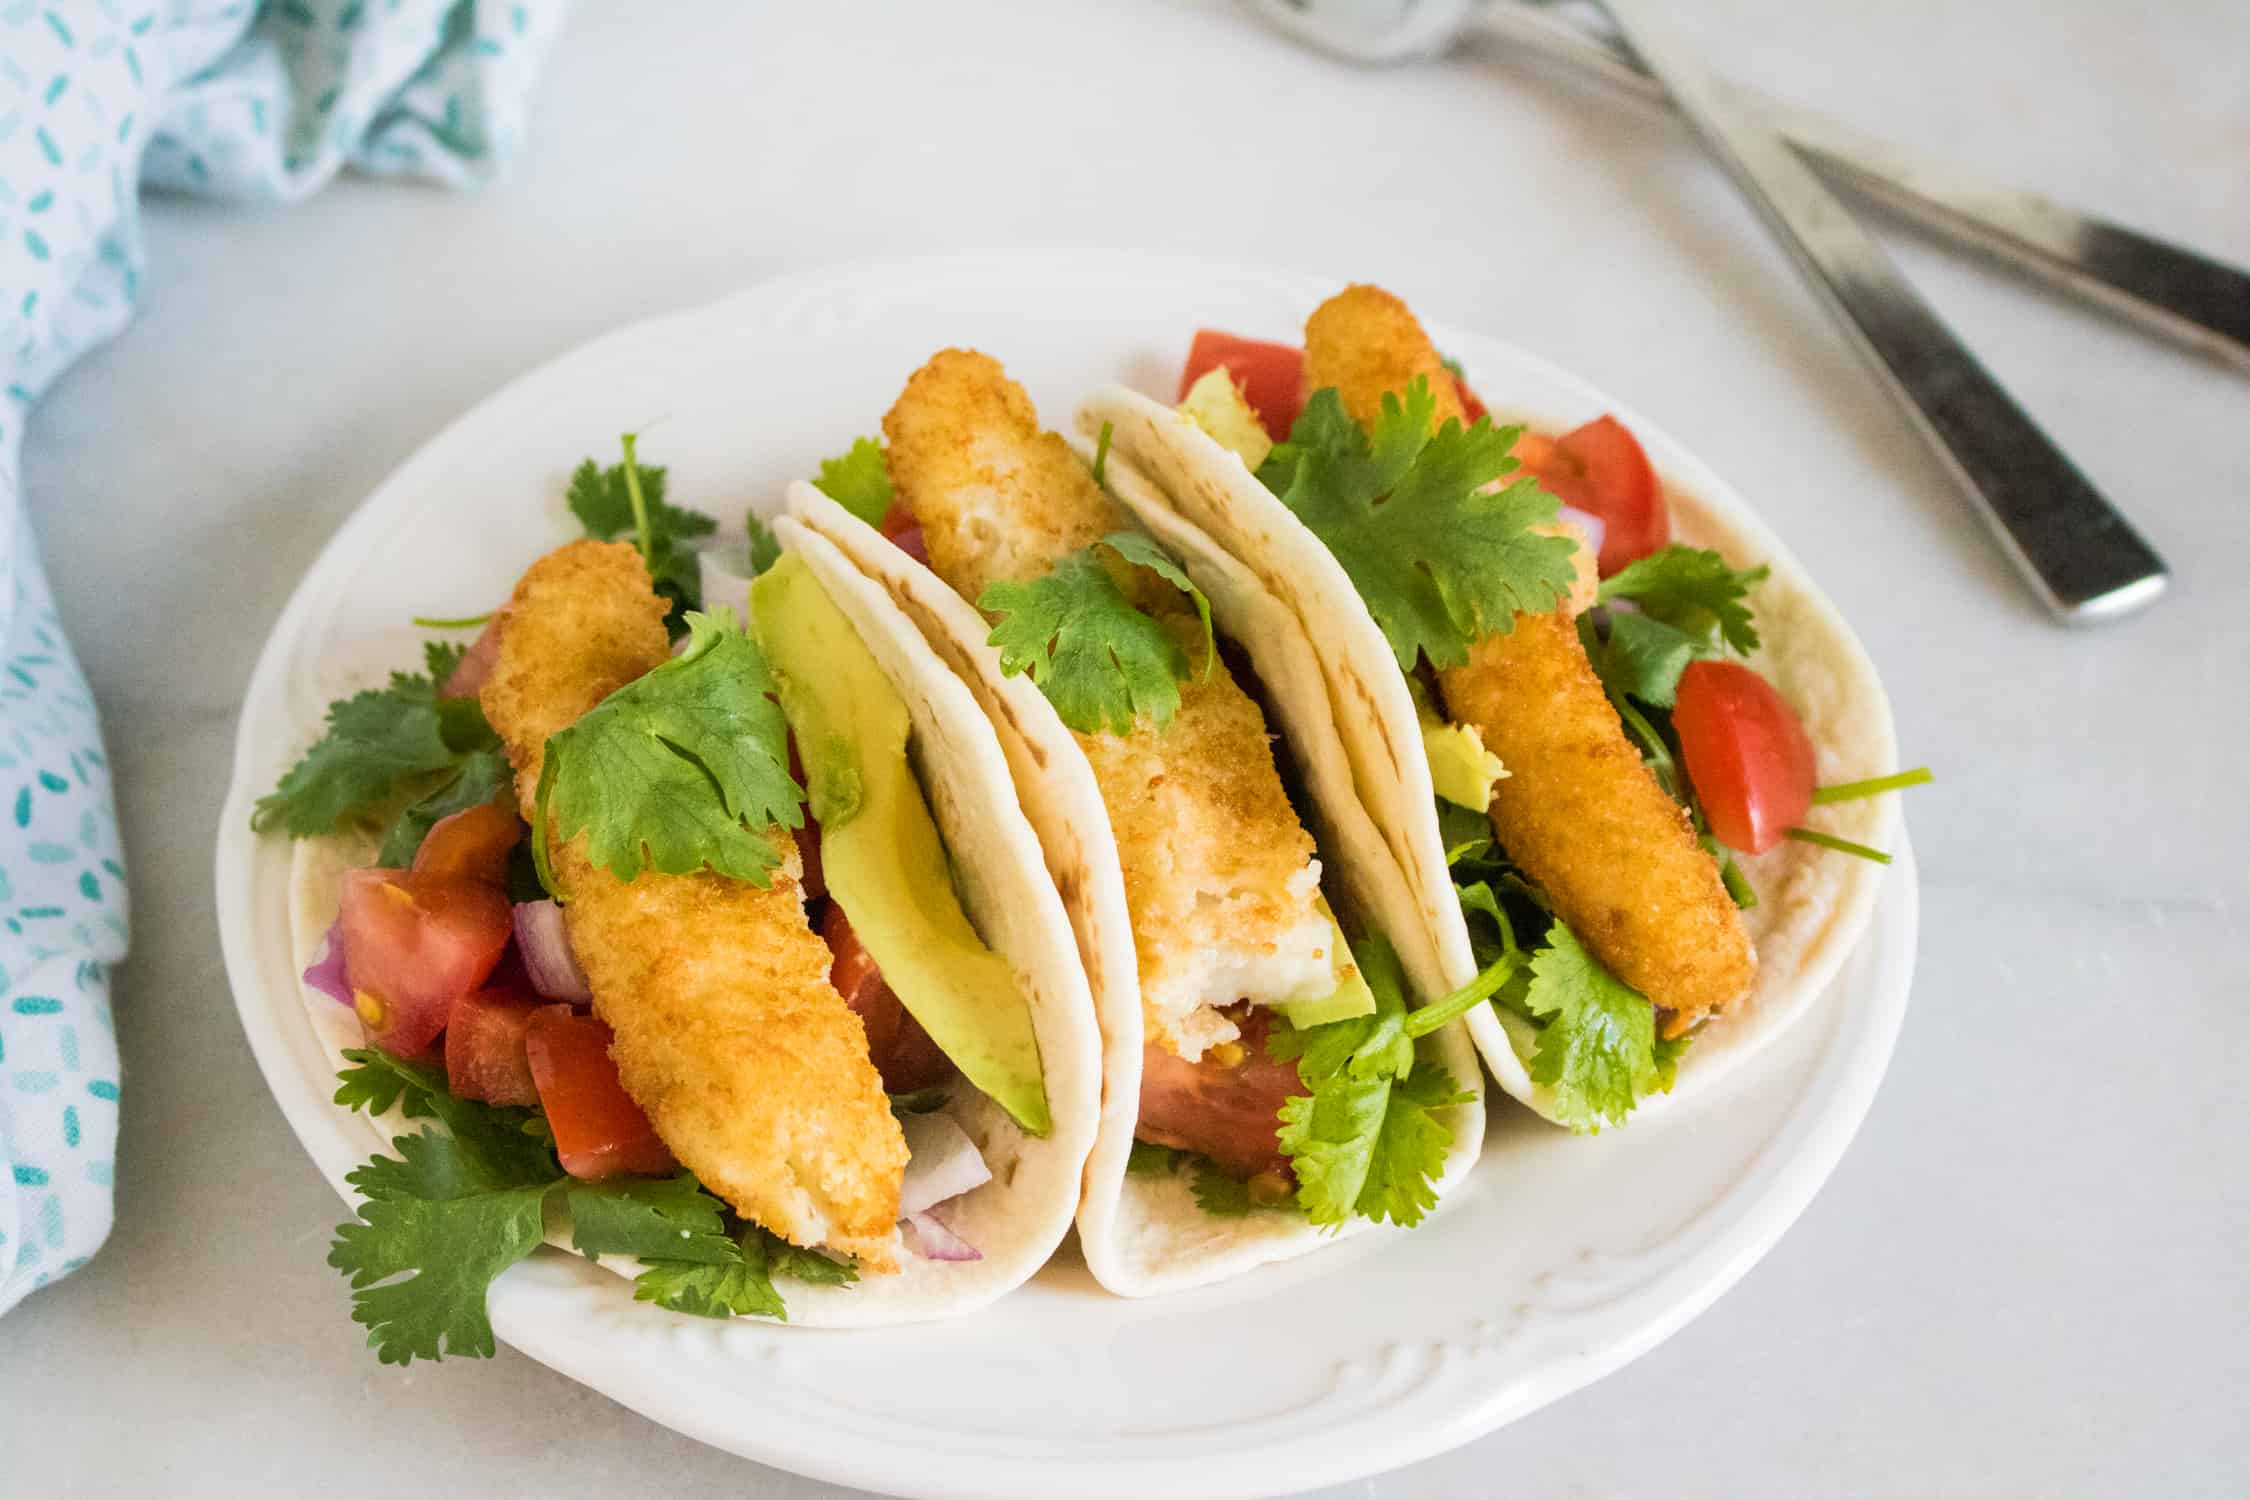 top-down view of three crunchy fish tacos served on a white plate next to silver fork and blue print cloth napkin